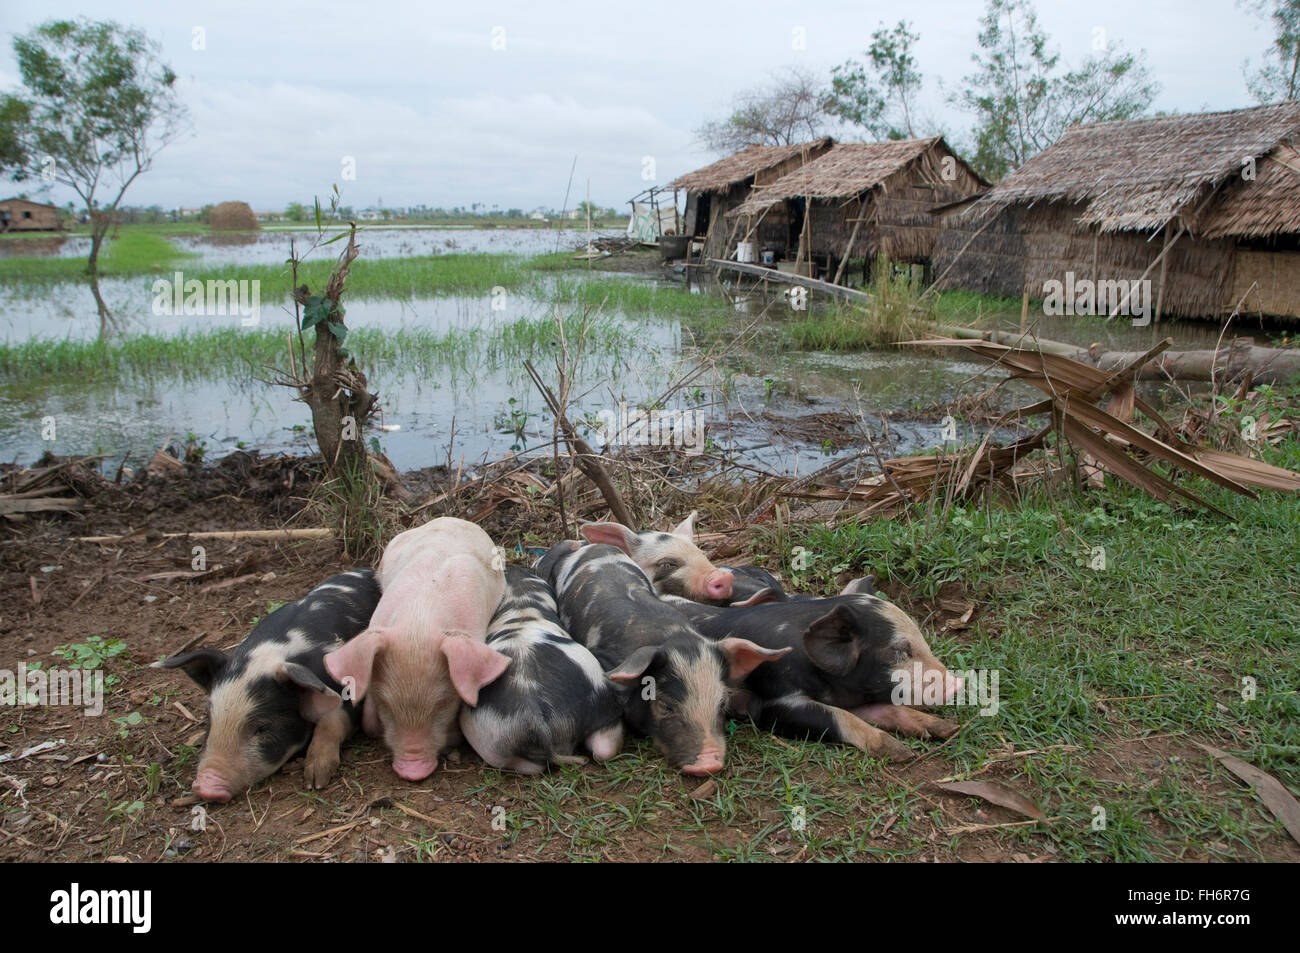 Young piglets laying in the ground in a flooded rural area caused by Cyclone Nargis in the delta region south of Yangon, Myanmar on 12 May 2008. Cyclone Nargis caused the worst natural disaster in the recorded history of Myanmar during early May 2008 causing catastrophic destruction and at least 138,000 fatalities. Stock Photo